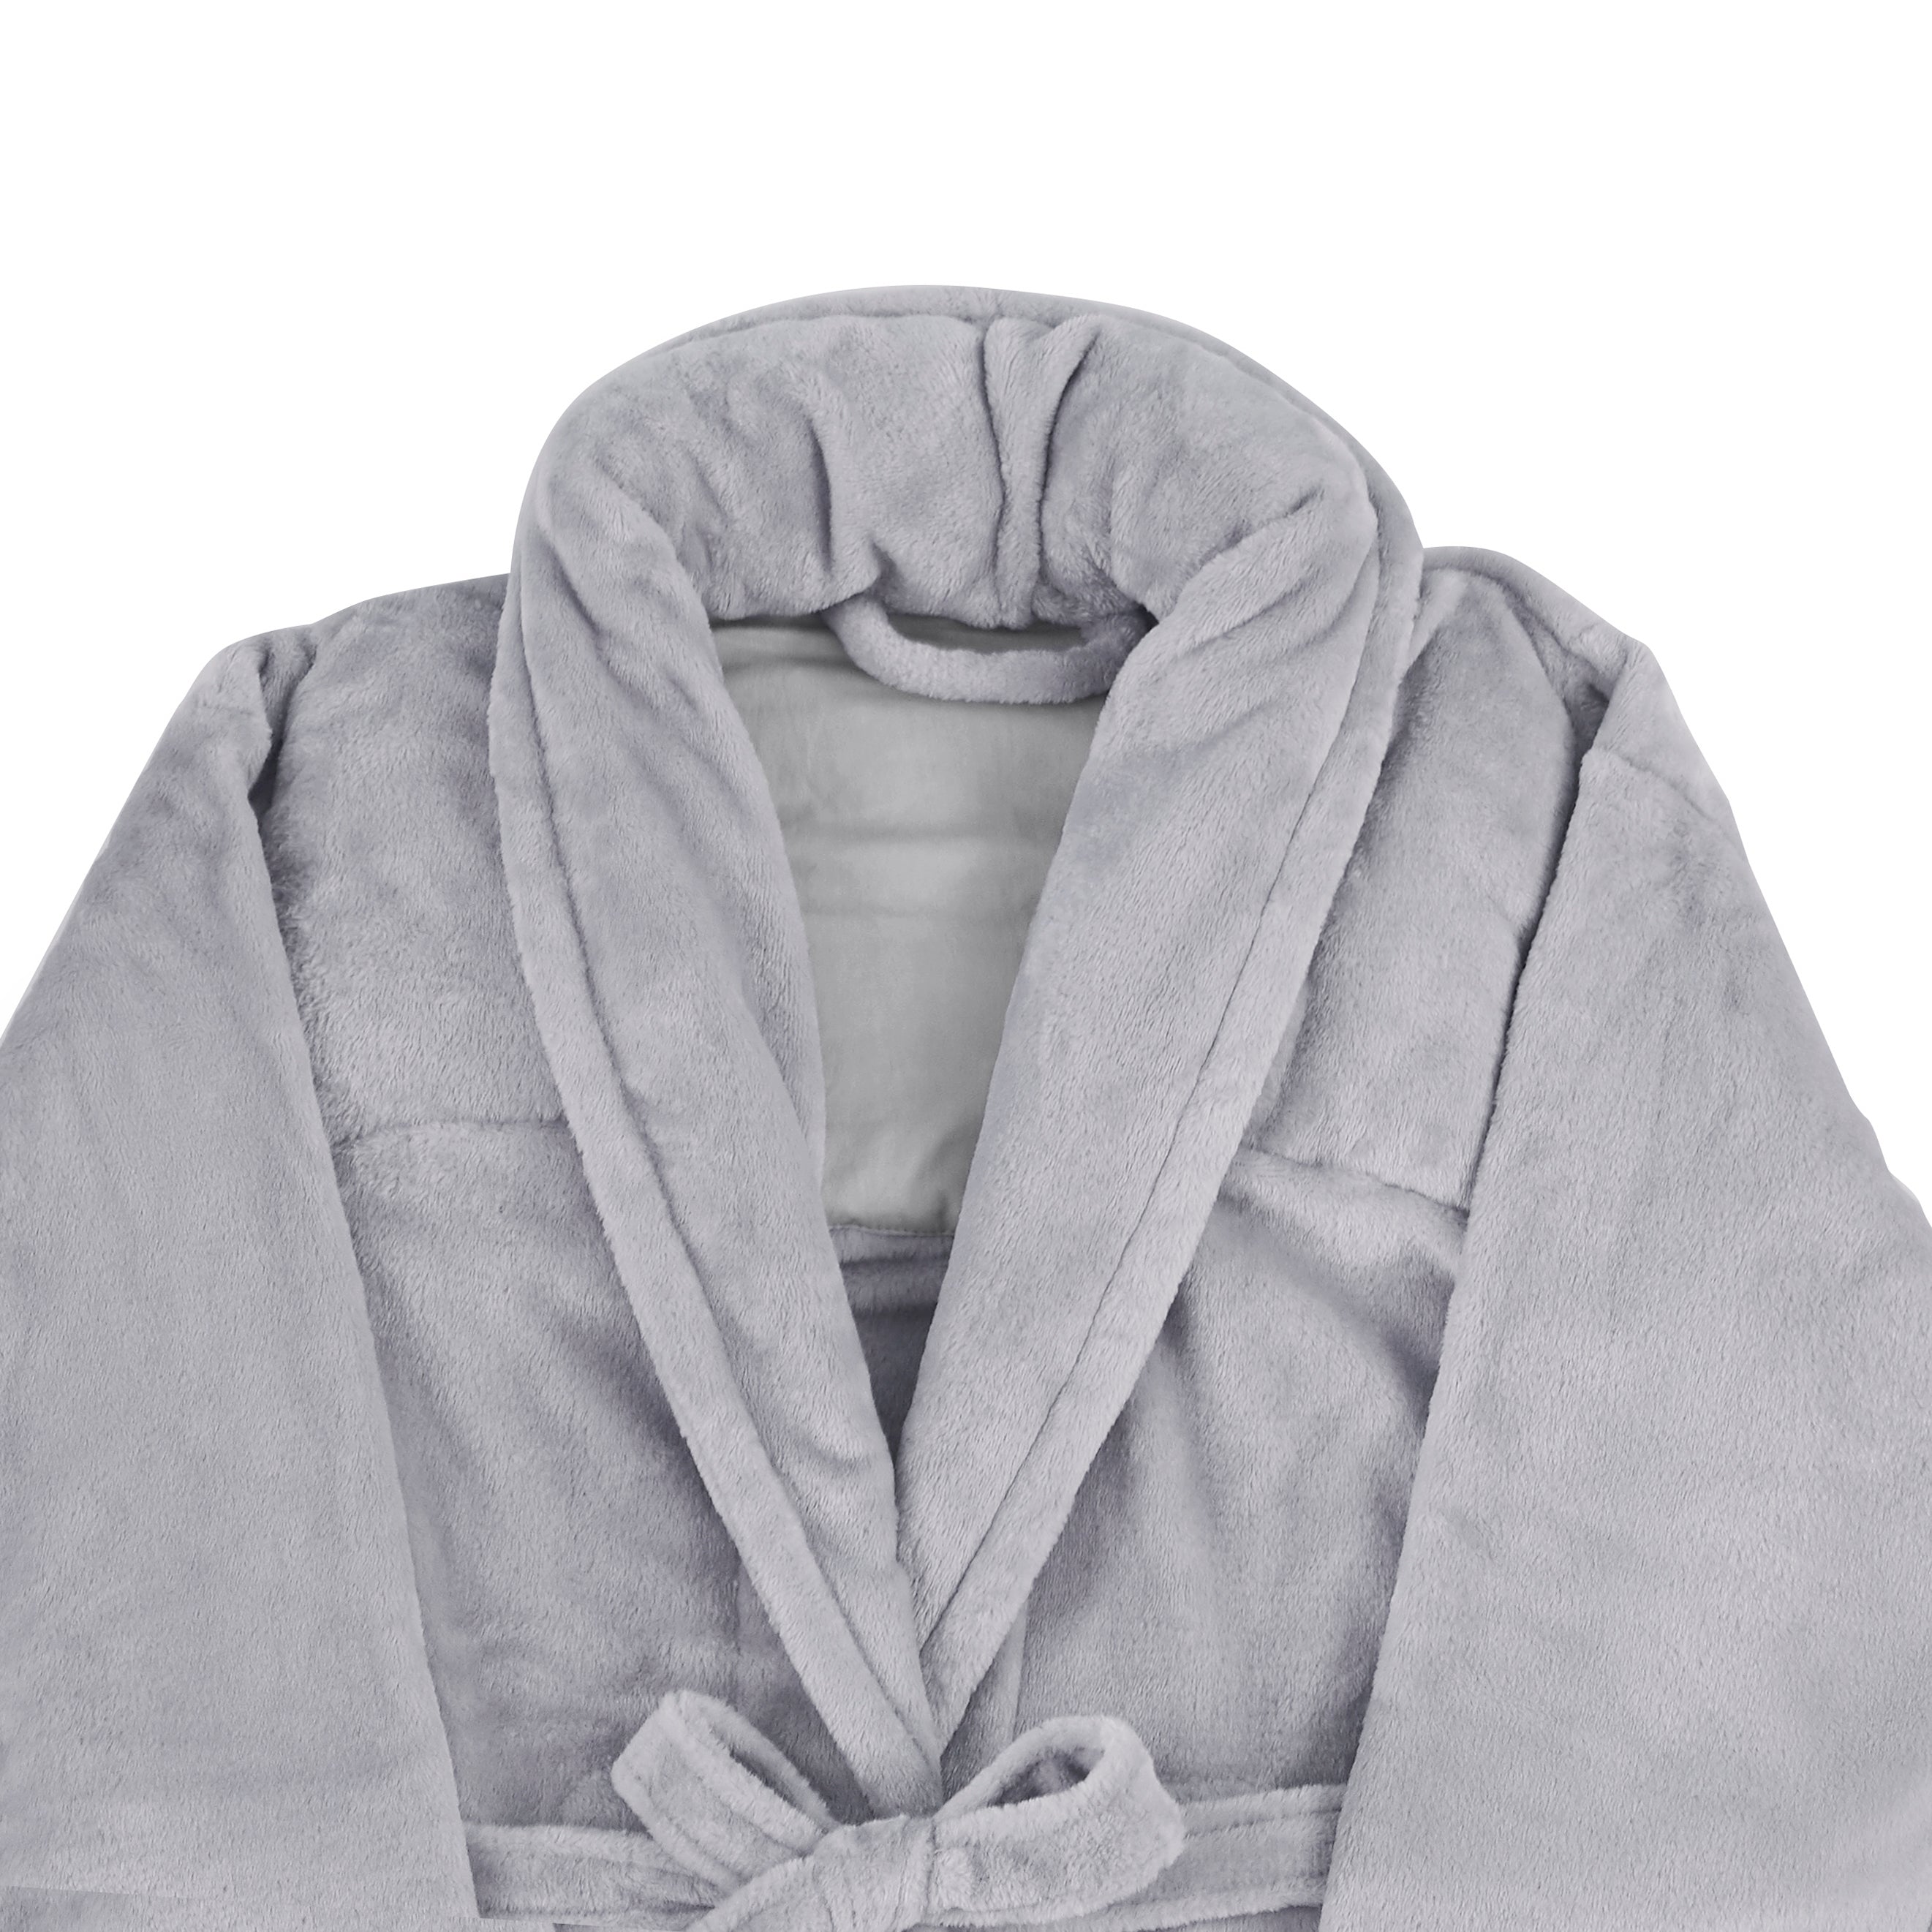 Weighted Robe Machine Washable 5 lb